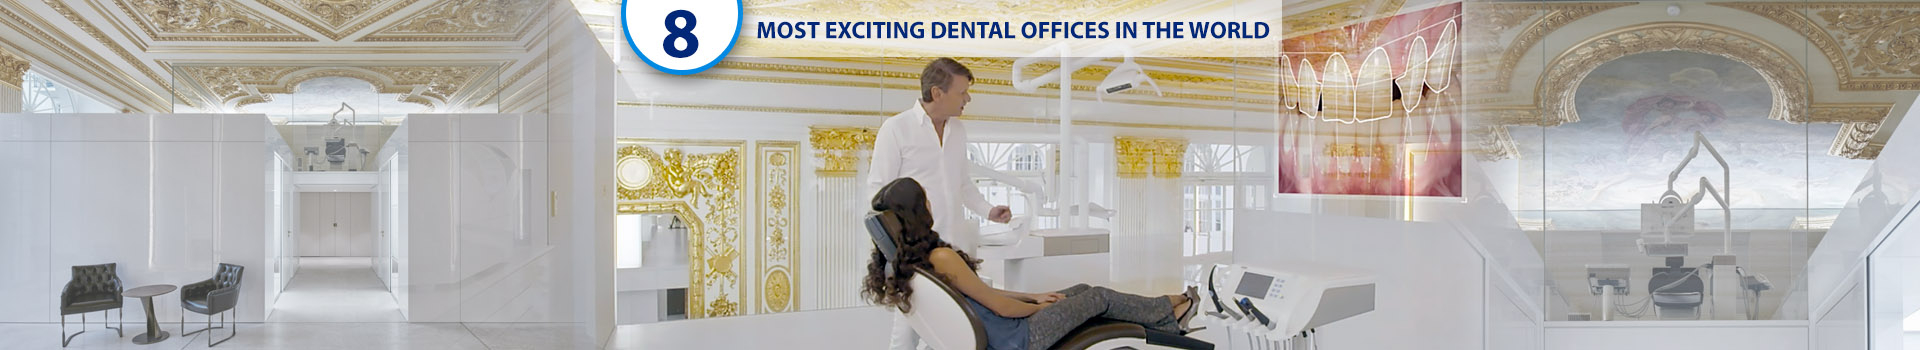 The 7+1 most exciting dental offices in the world